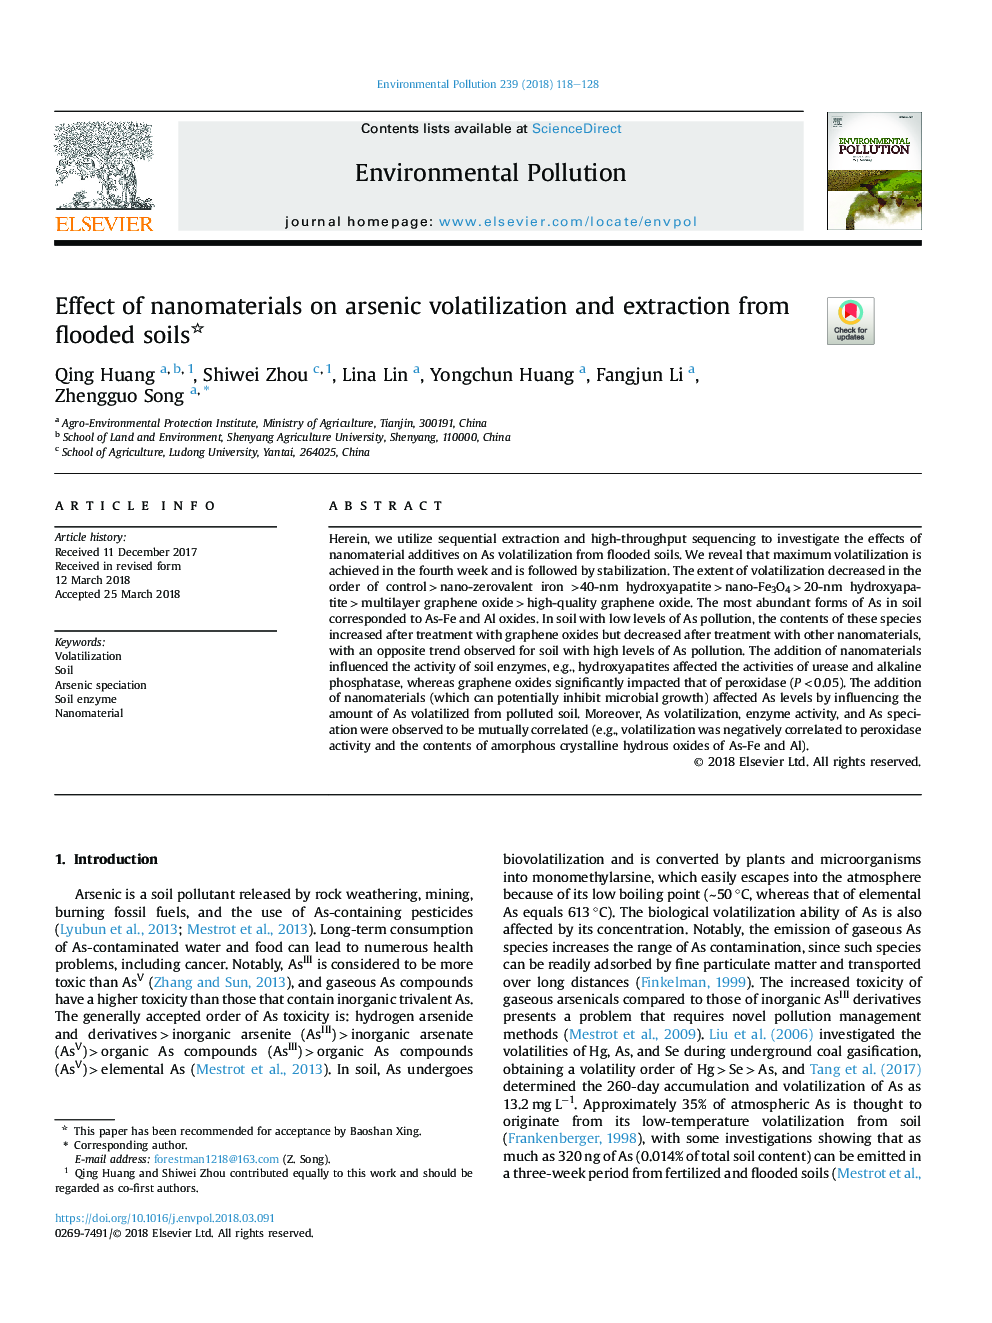 Effect of nanomaterials on arsenic volatilization and extraction from flooded soils